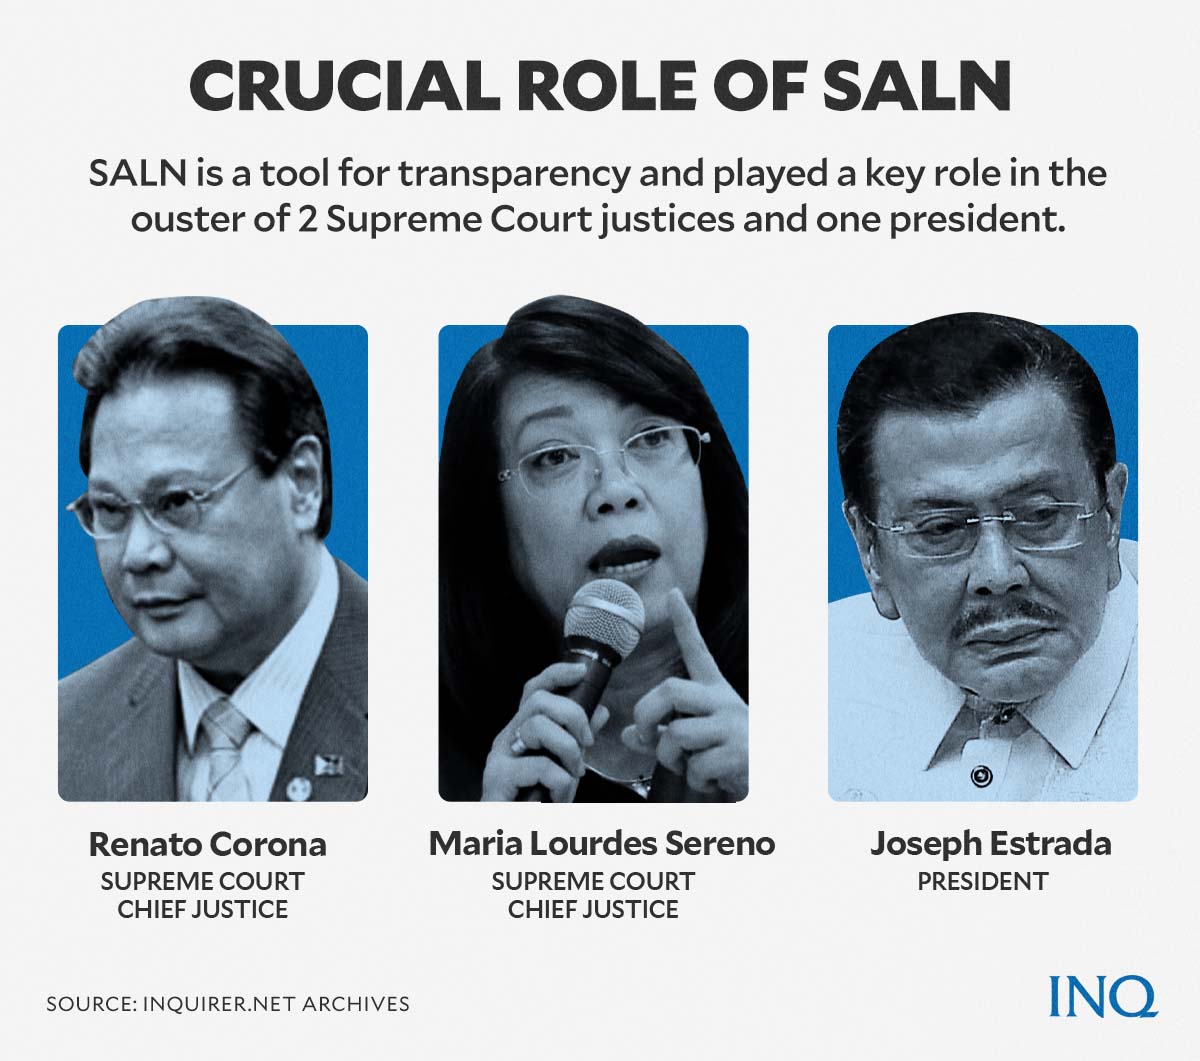 Crucial role of SALN